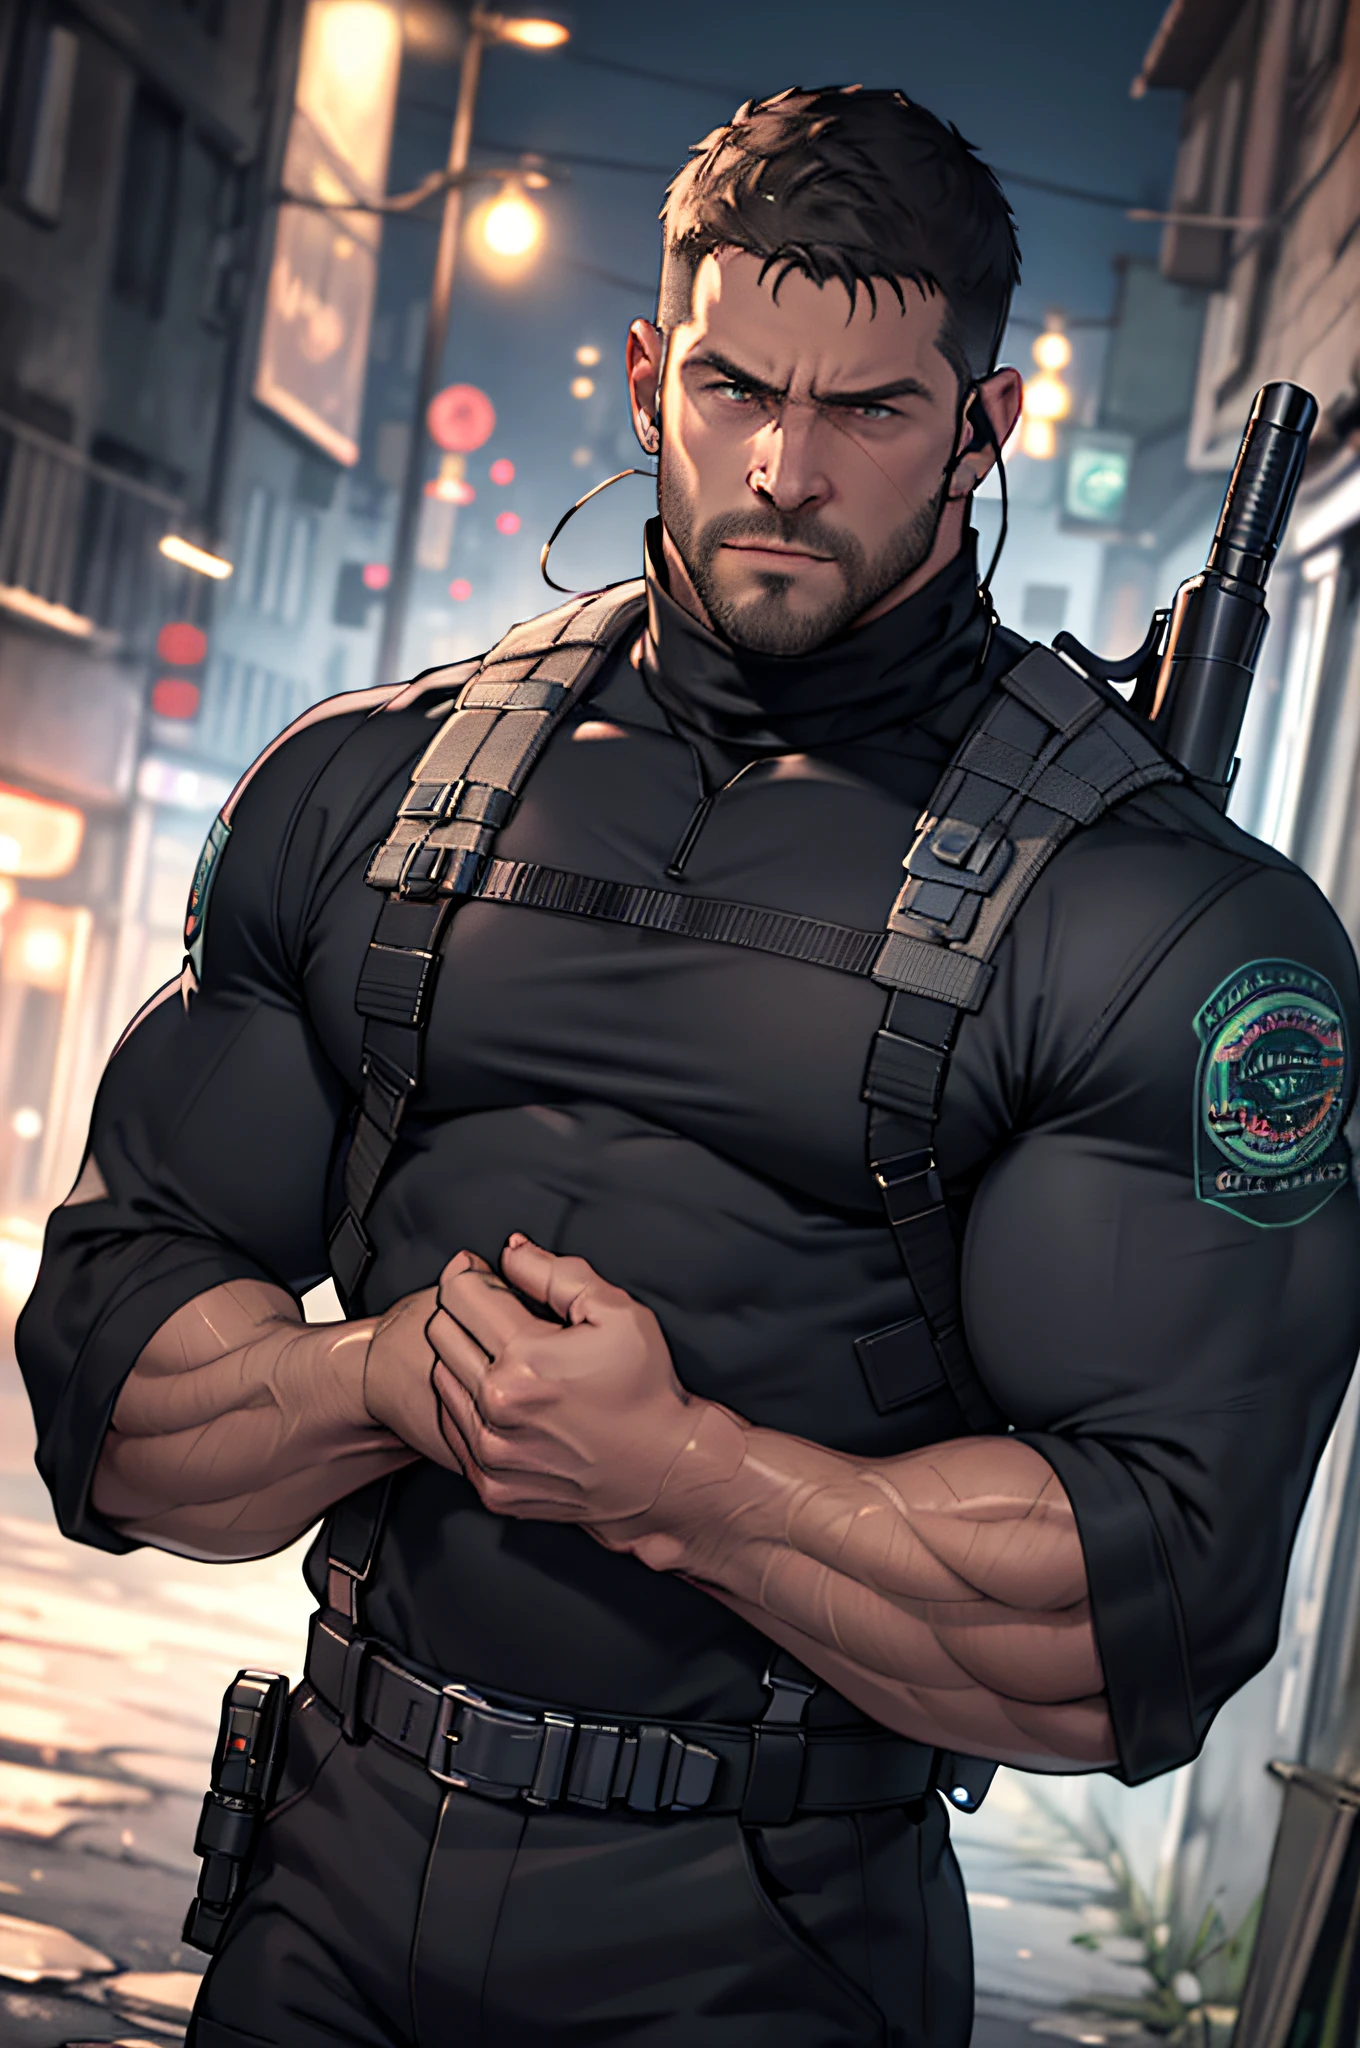 Dark gothic village in the background, old Chris Redfield from Resident Evil 8, 48 year old, muscular male, tall and hunk, biceps, abs, chest, black cold turtleneck, black trousers, suspenders, earpiece, belt, thick beard, holding an assault rifle, cold face, video games style, high resolution:1.2, best quality, masterpiece, dark nightime, dark atmosphere, shadow, upper body shot